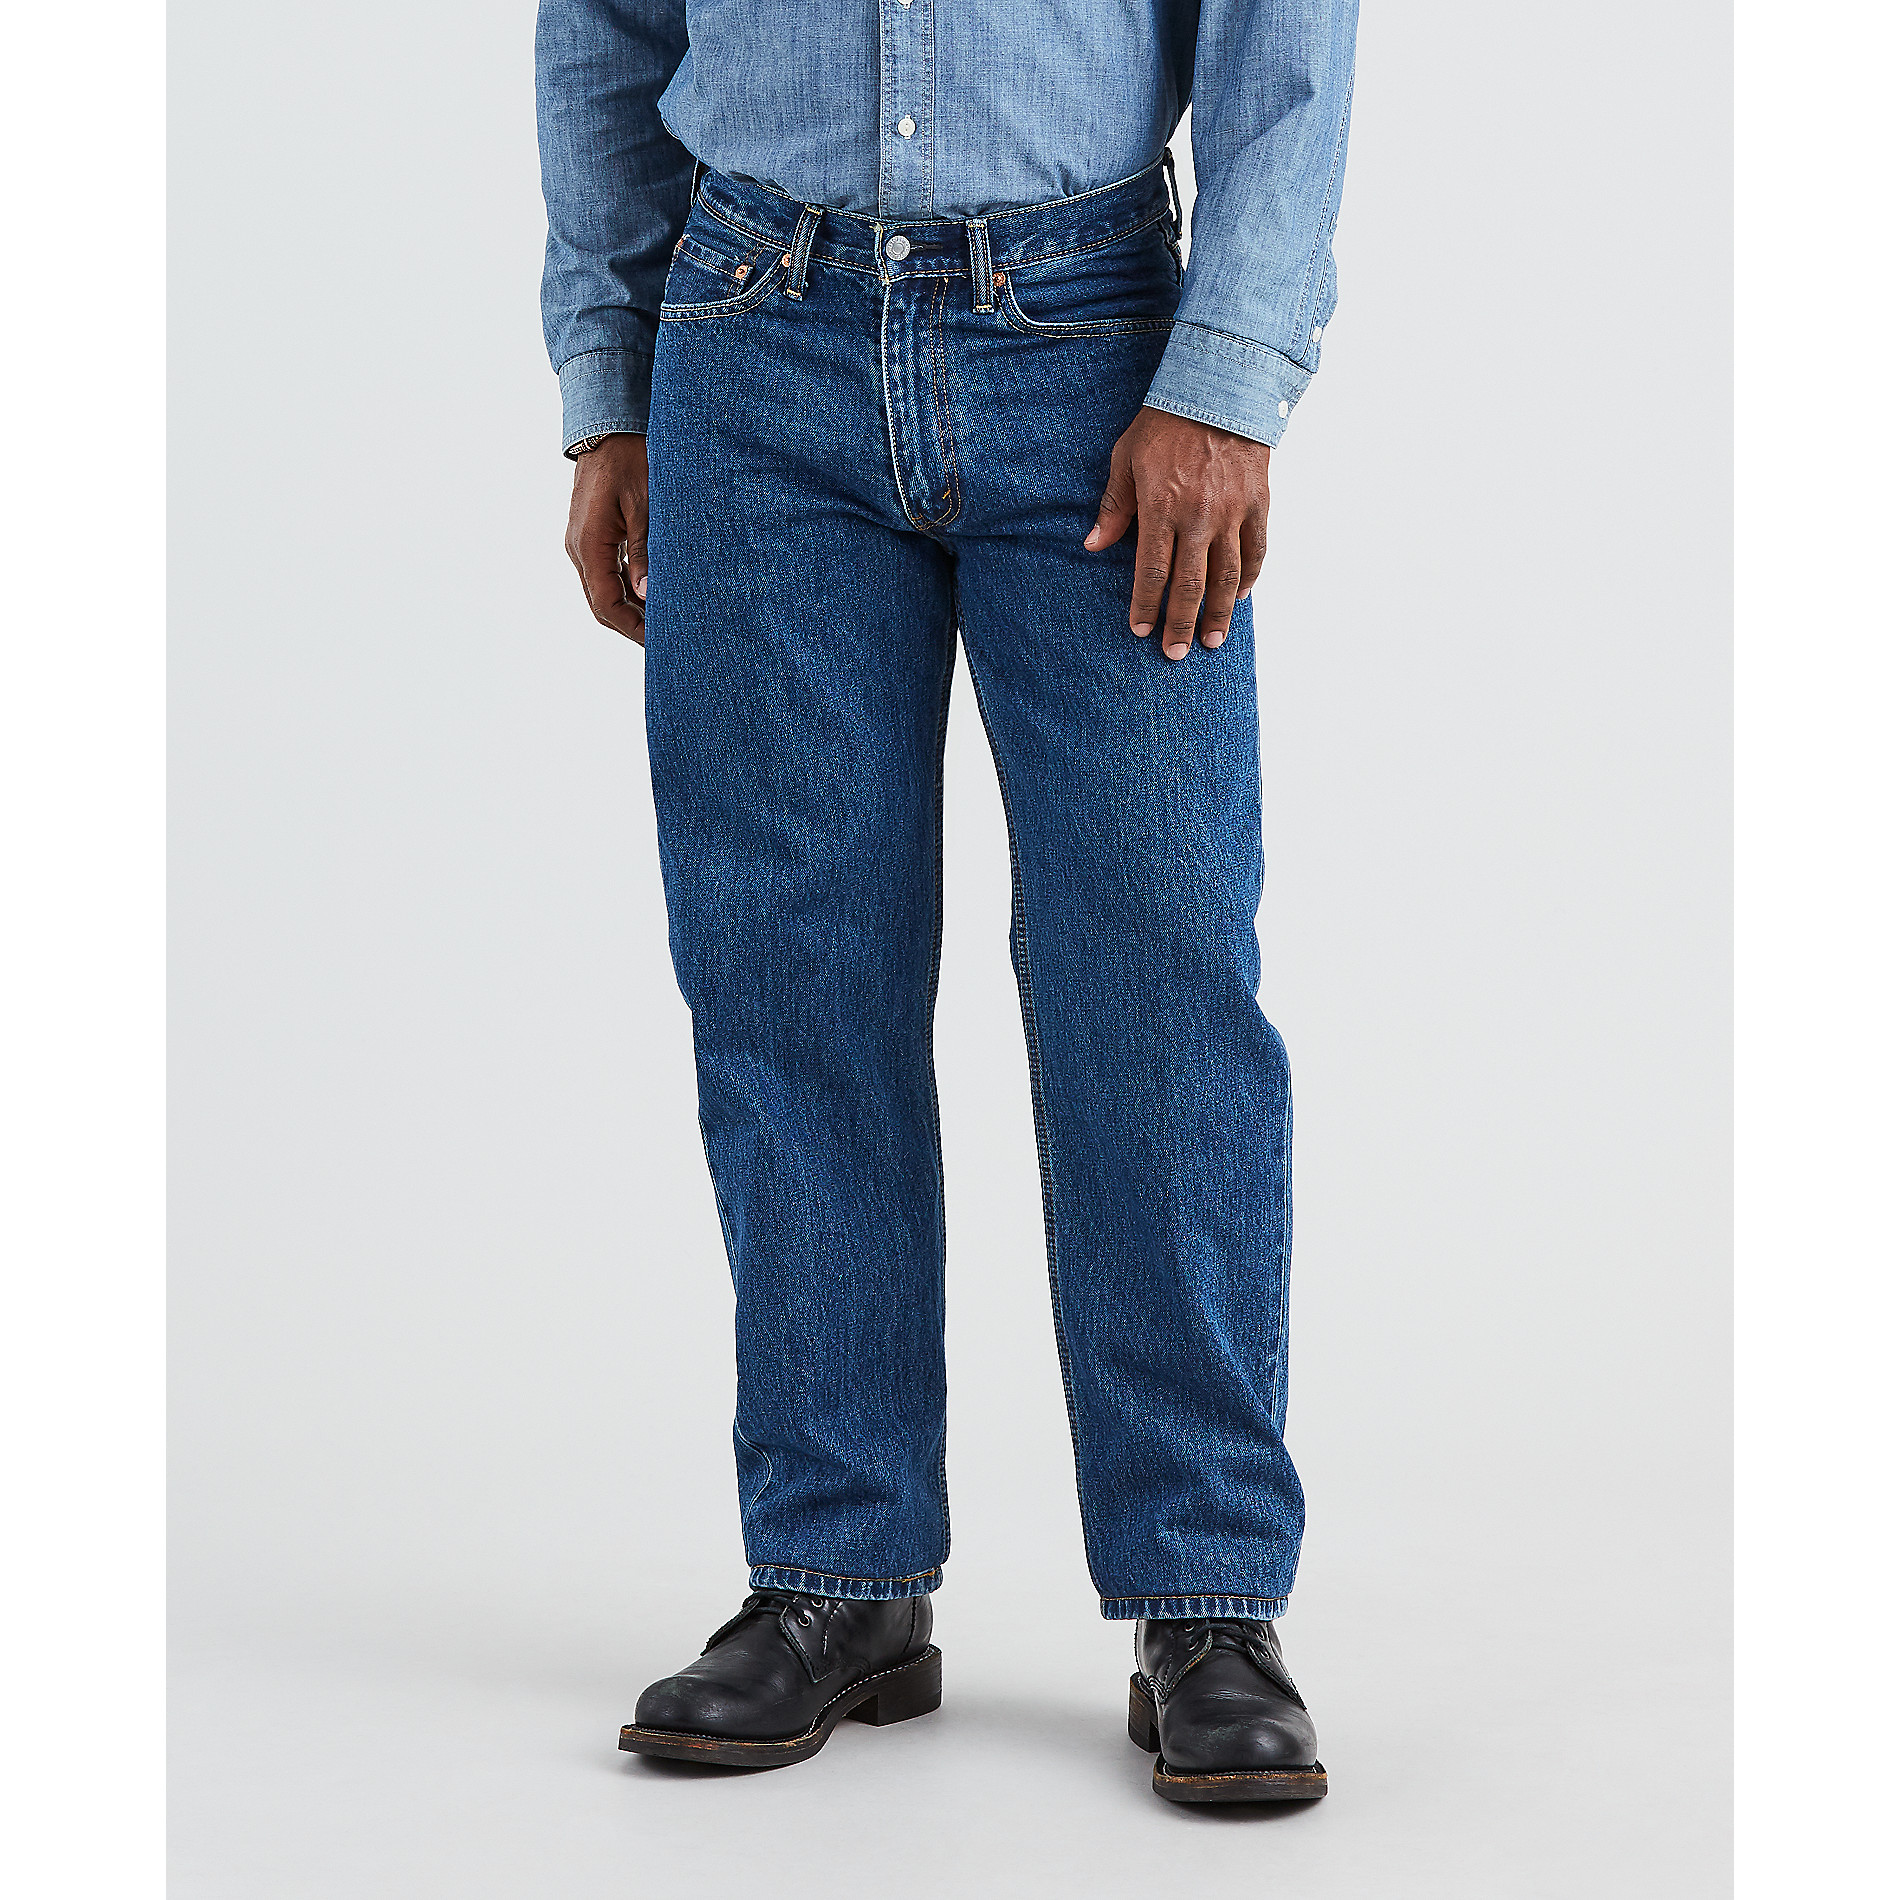 levi-s-men-s-550-relaxed-fit-jeans-shop-your-way-online-shopping